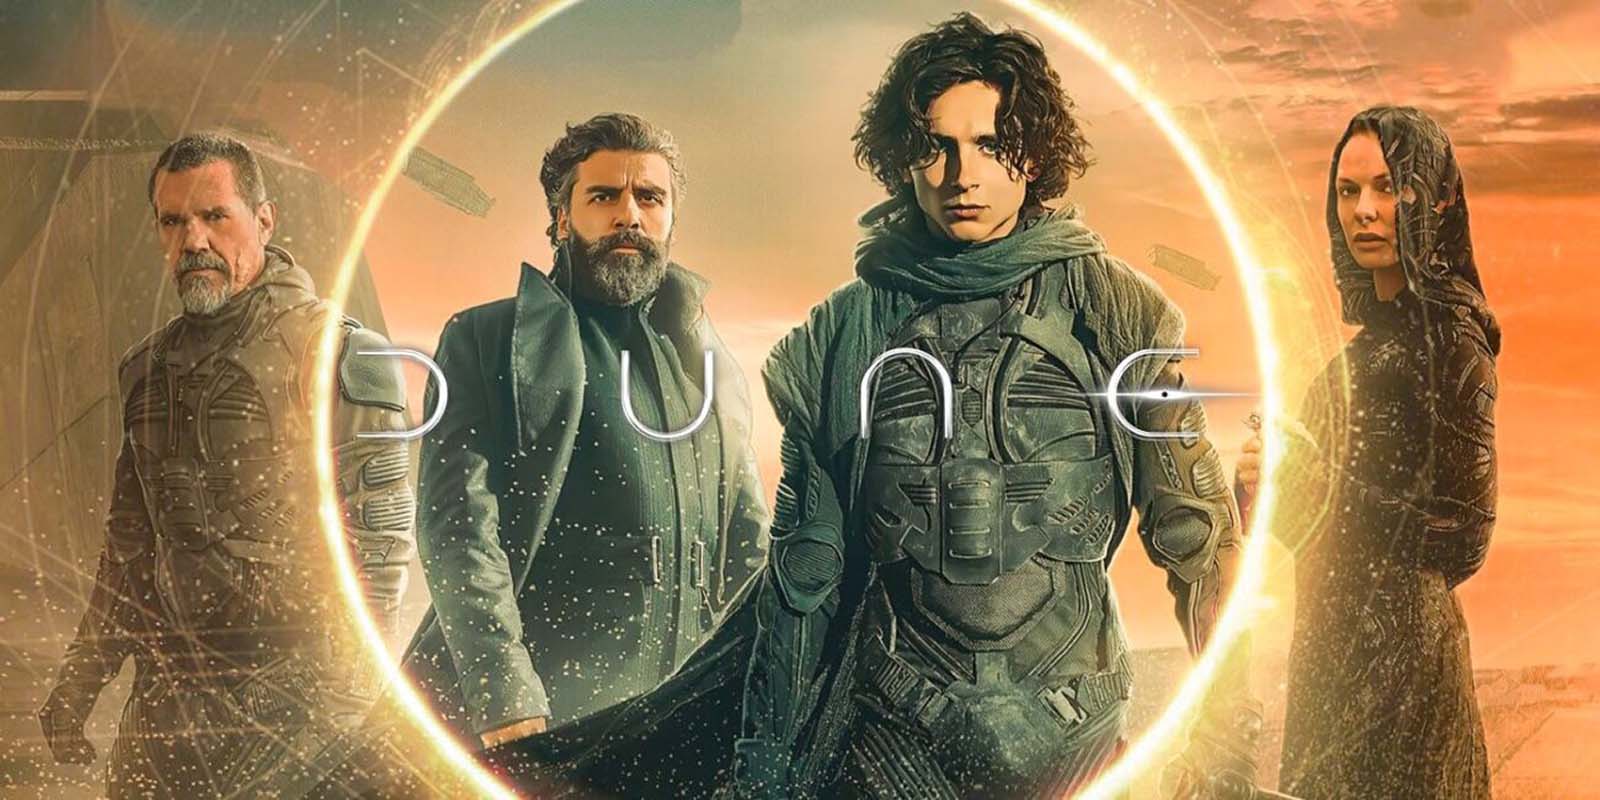 Watch ‘Dune’ available on streaming for free? Where to watch online